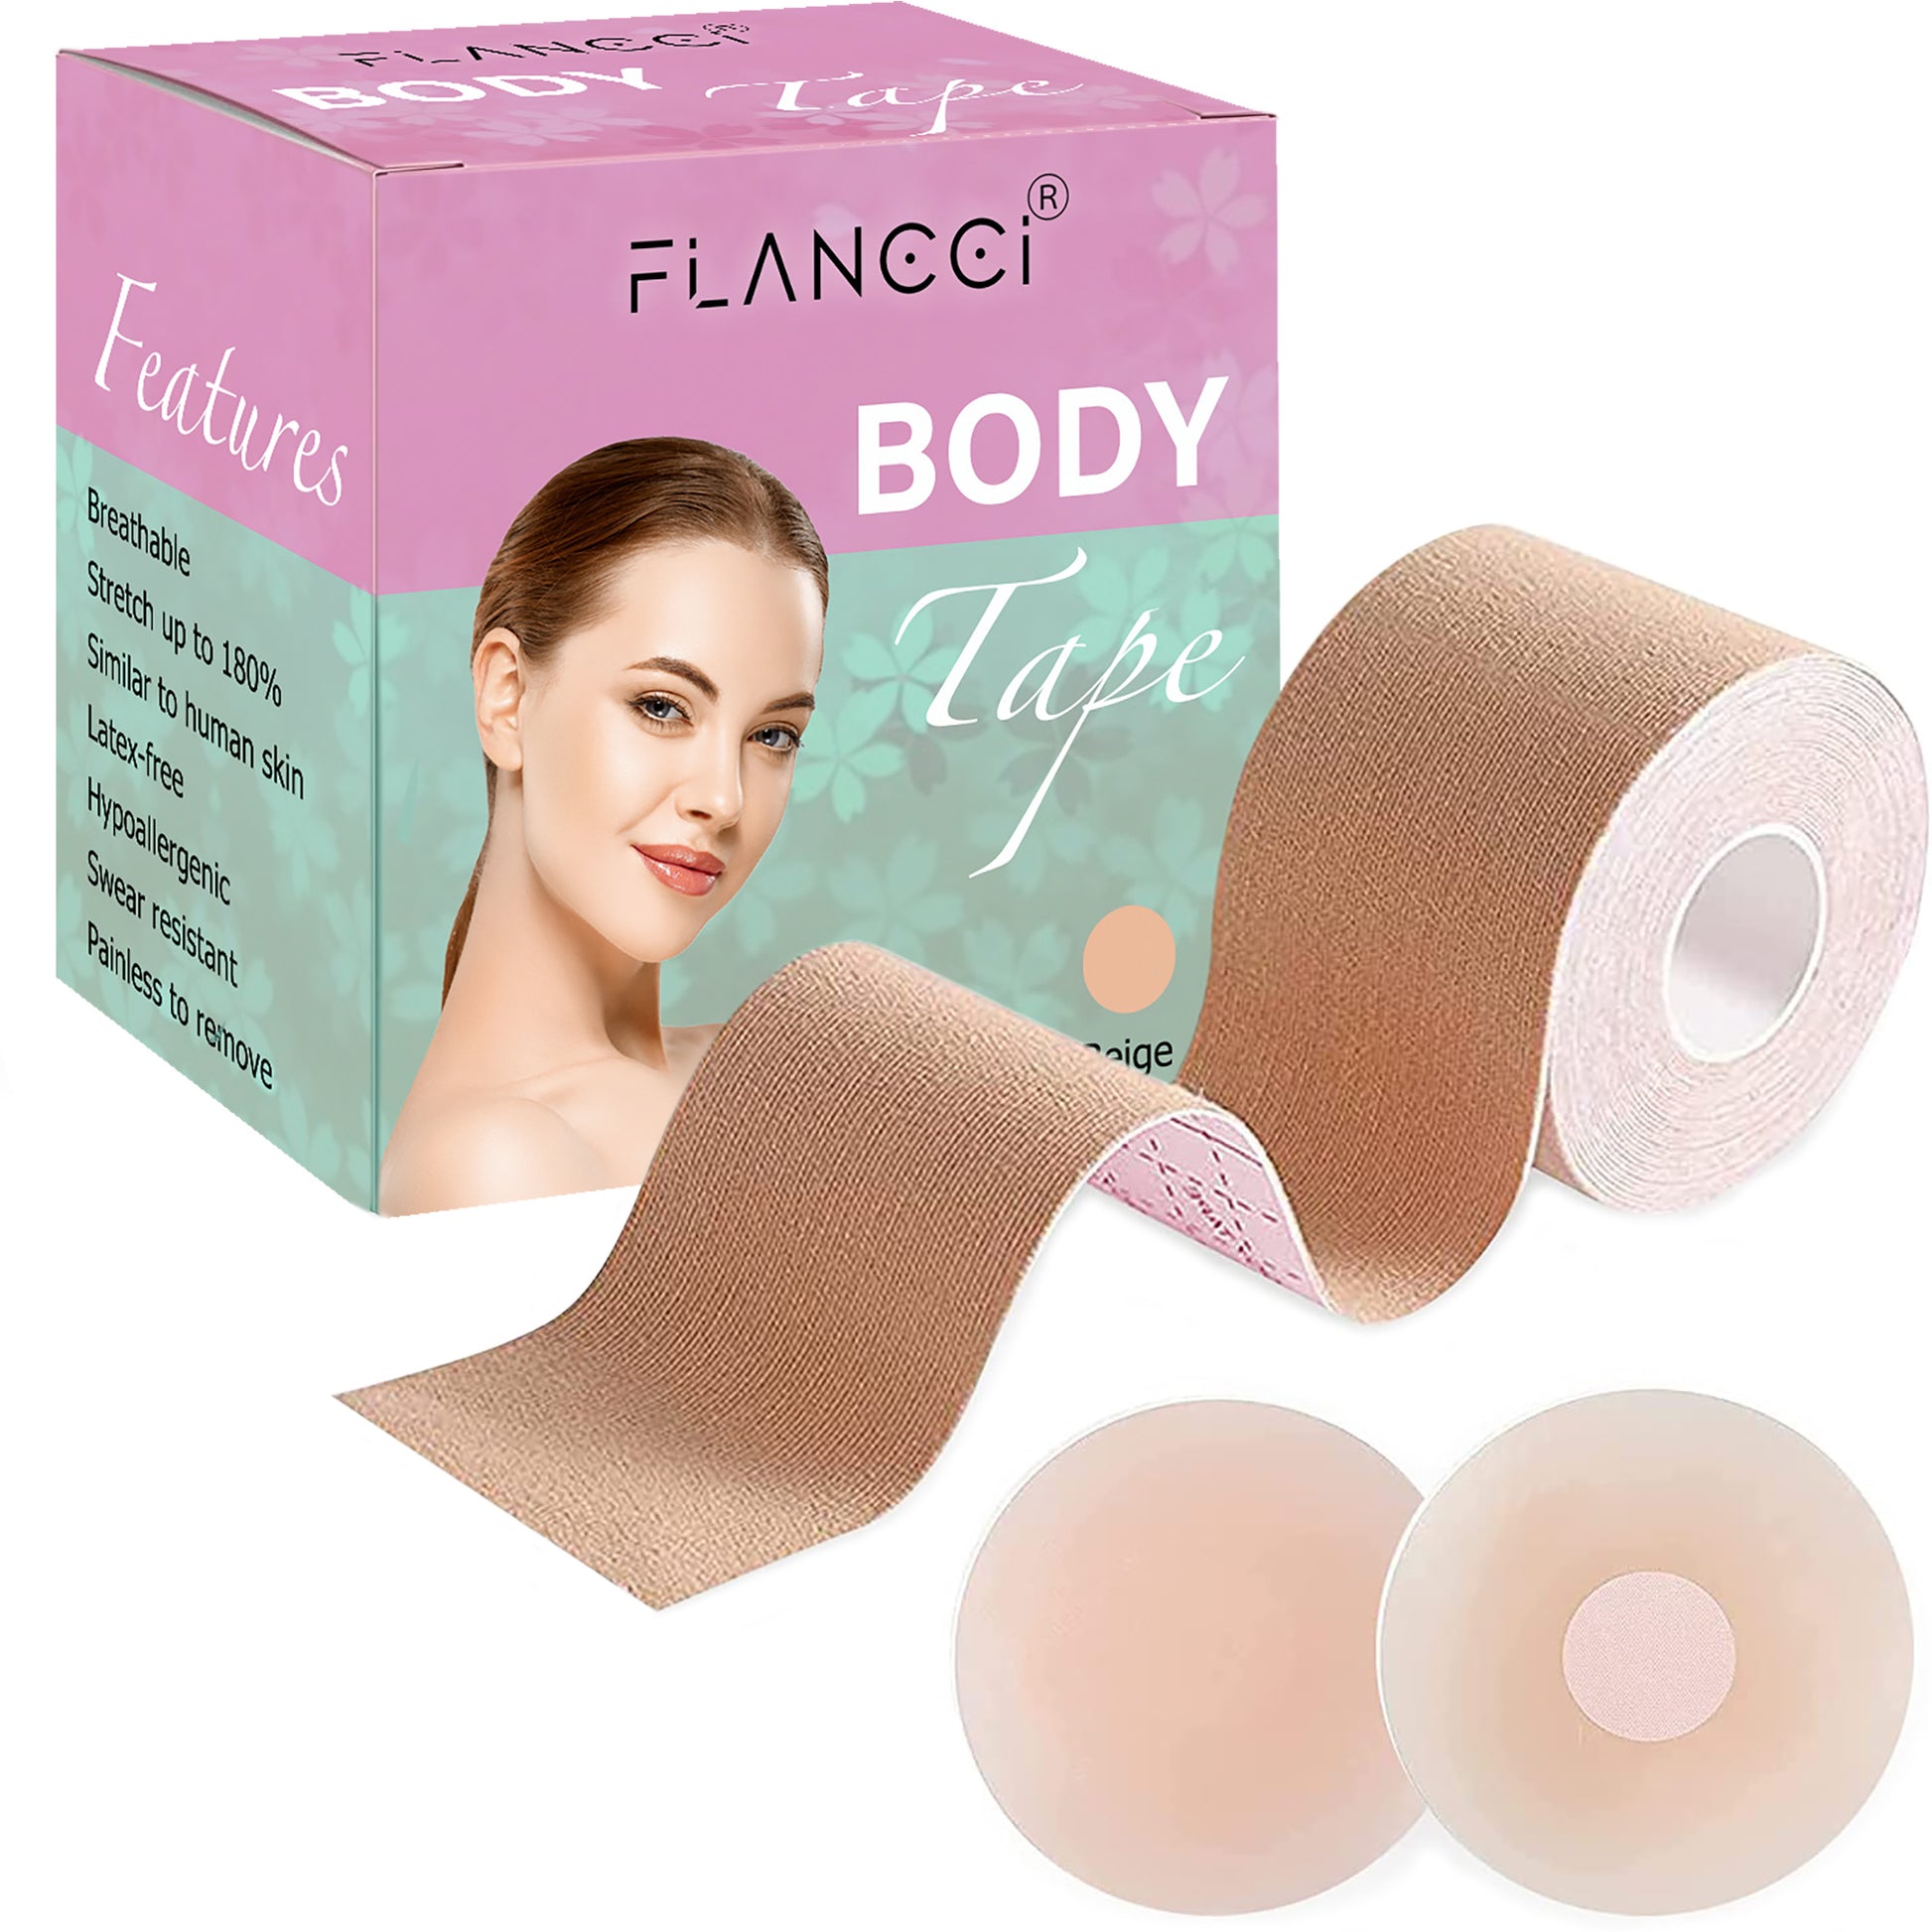 Skin Boob Tape With 2 Nipple Covers, Booby Body Tape For Large